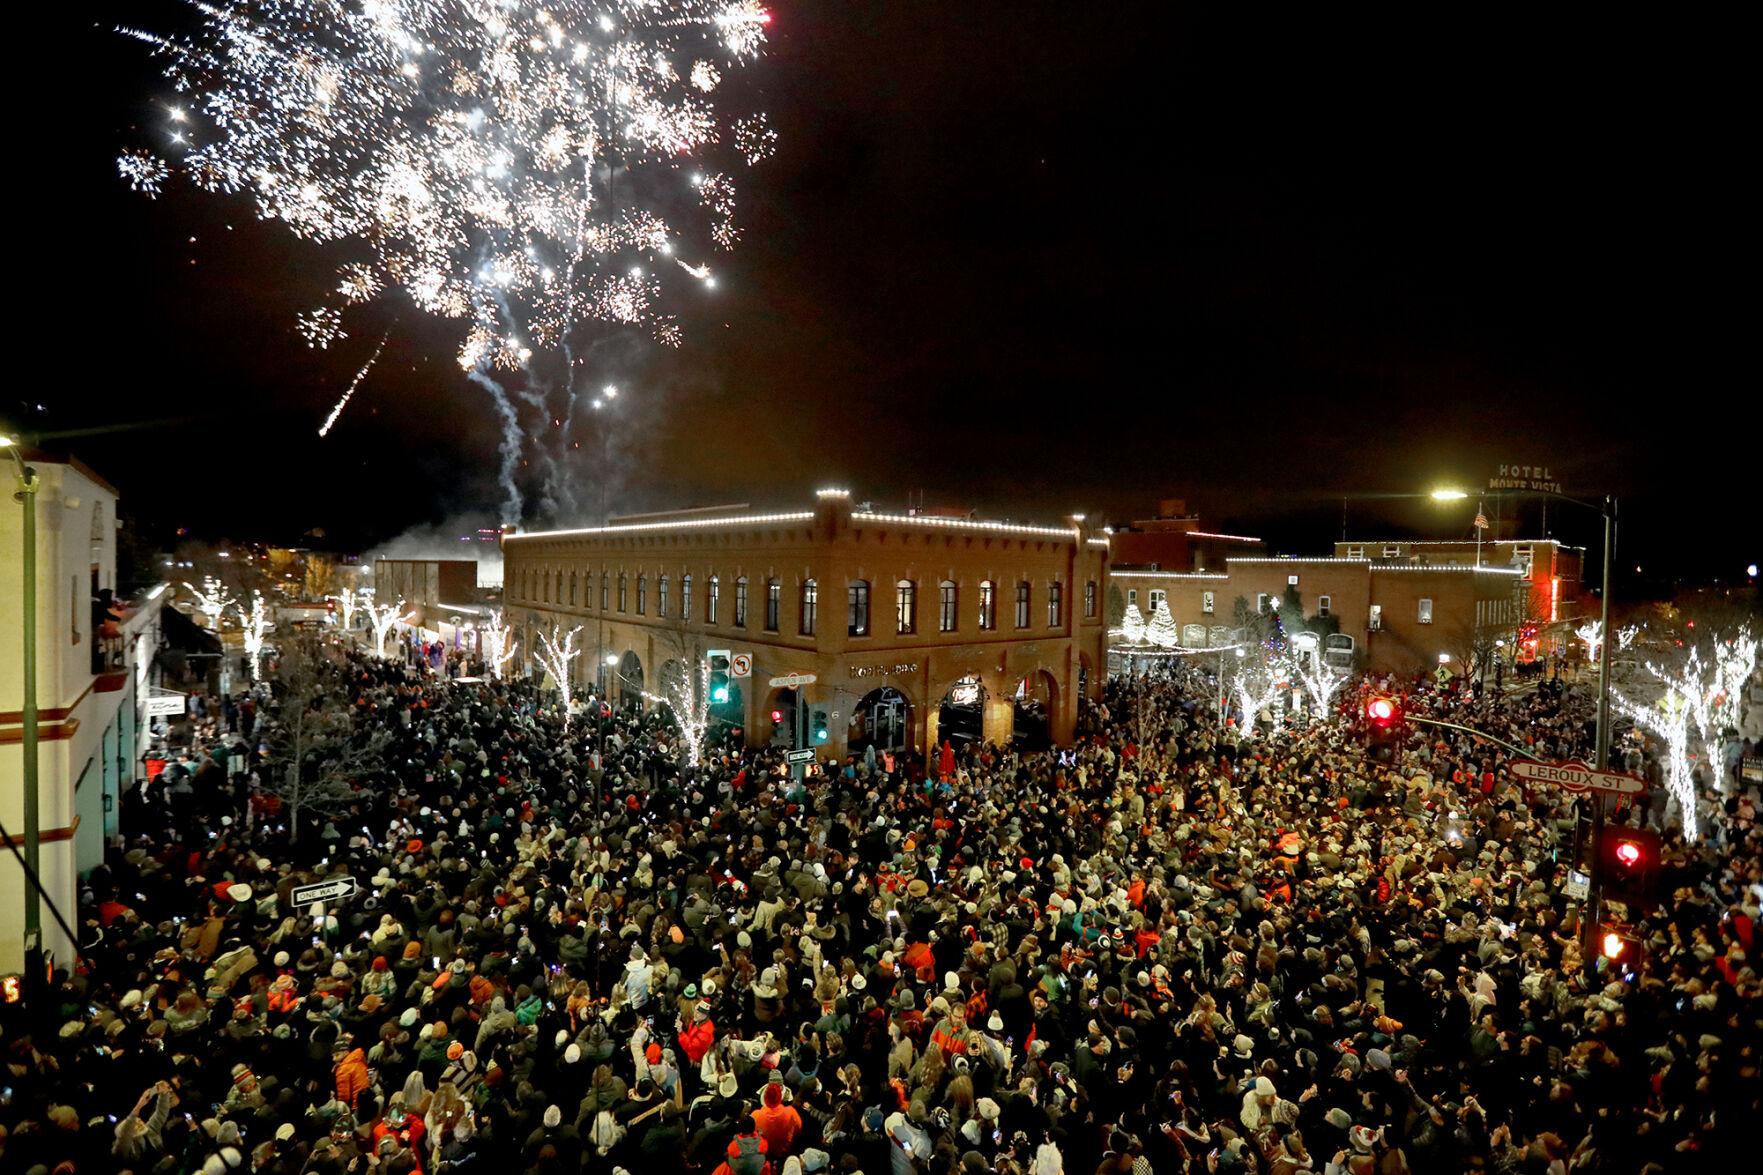 Gallery Big crowds return for Pinecone Drop in downtown Flagstaff